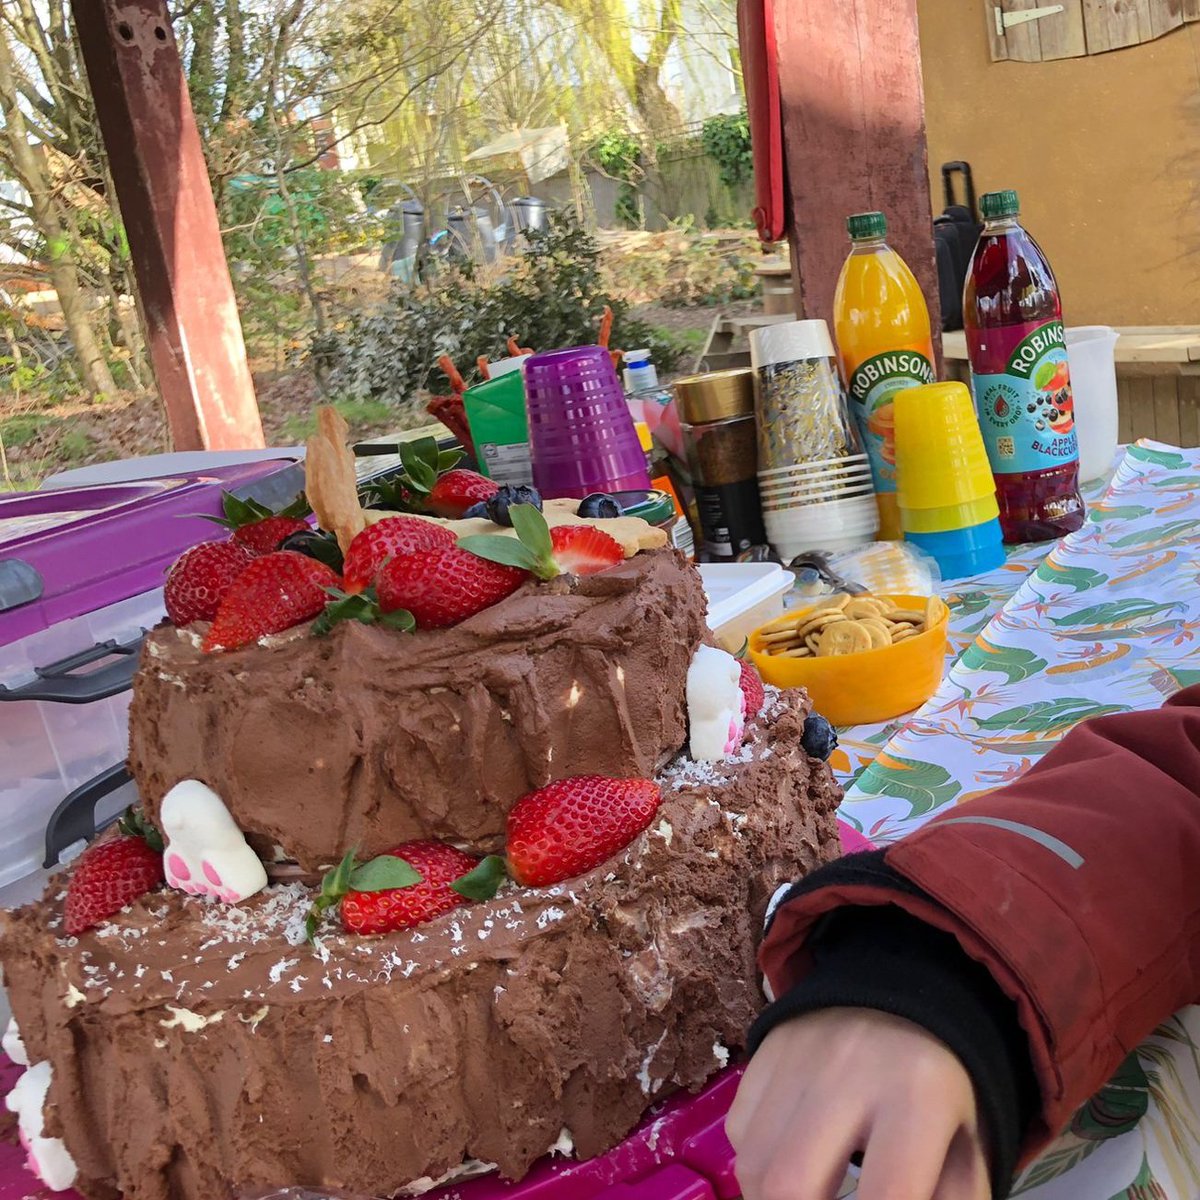 Islington Squirrel Scouts are at Meadow Orchard for an Open Day and Easter Egg hunt today! There's also this epic Squirrel Easter Cake and doesn't it look amazing! Easter Egg Hunt from 9.30 - 11.00 today, please do pop along to meet the Scout Leaders and share a slice of Cake!